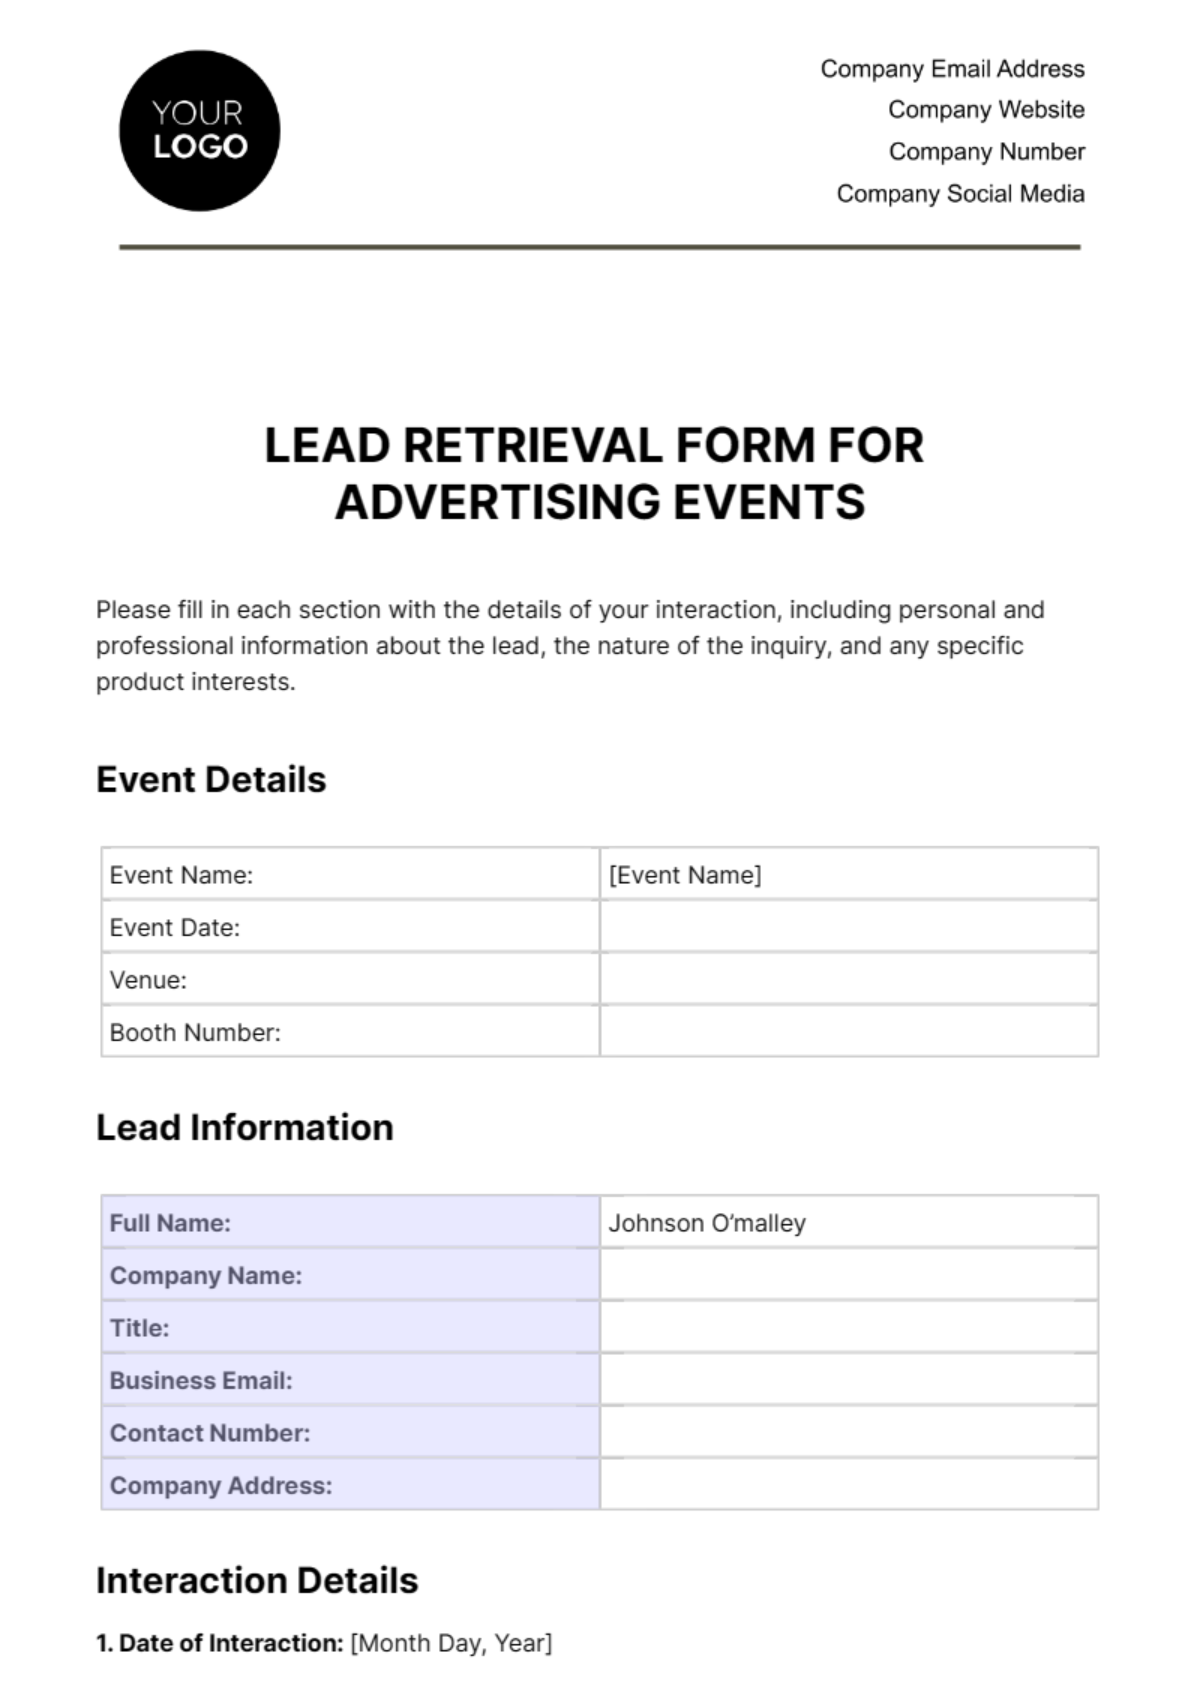 Free Lead Retrieval Form for Advertising Events Template